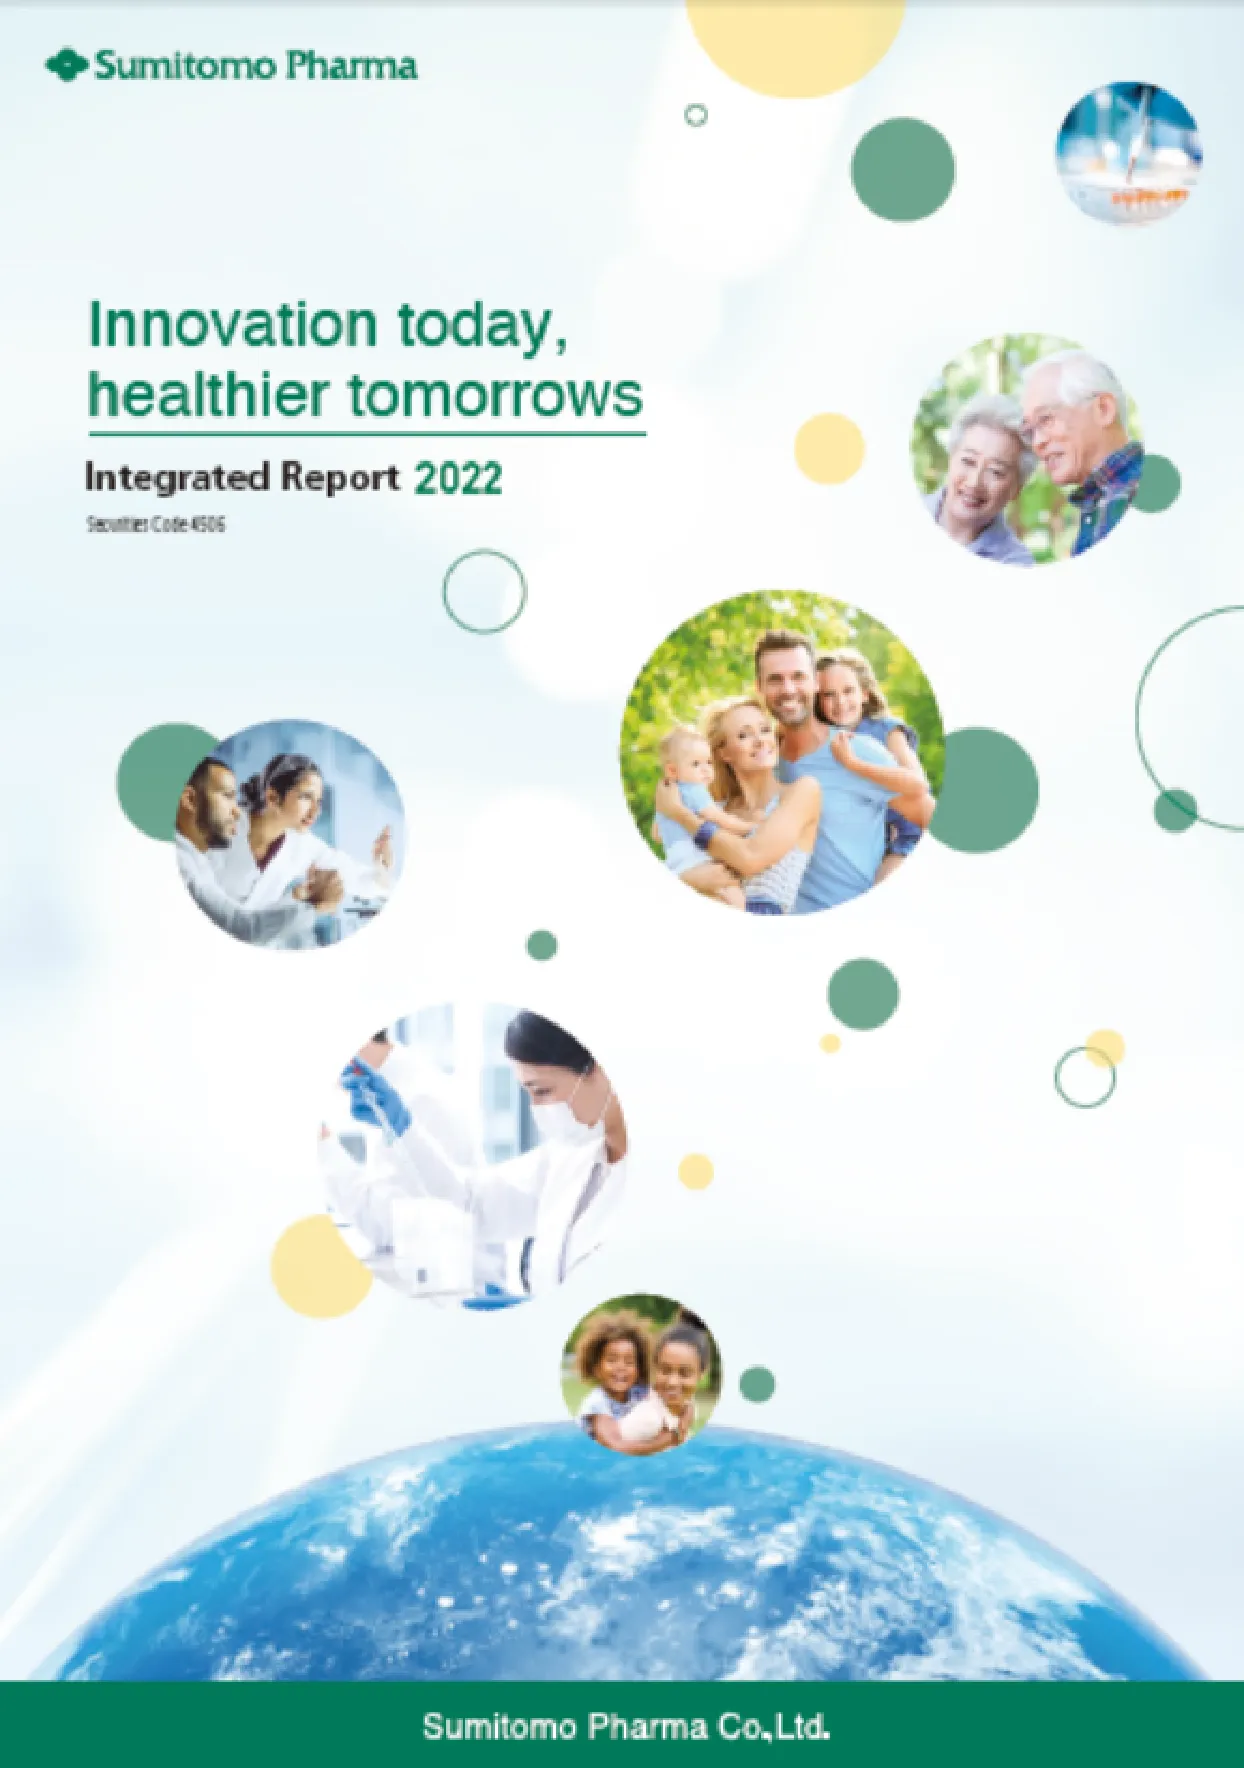 Integrated Report 2022 (For the year ended March 31, 2022)